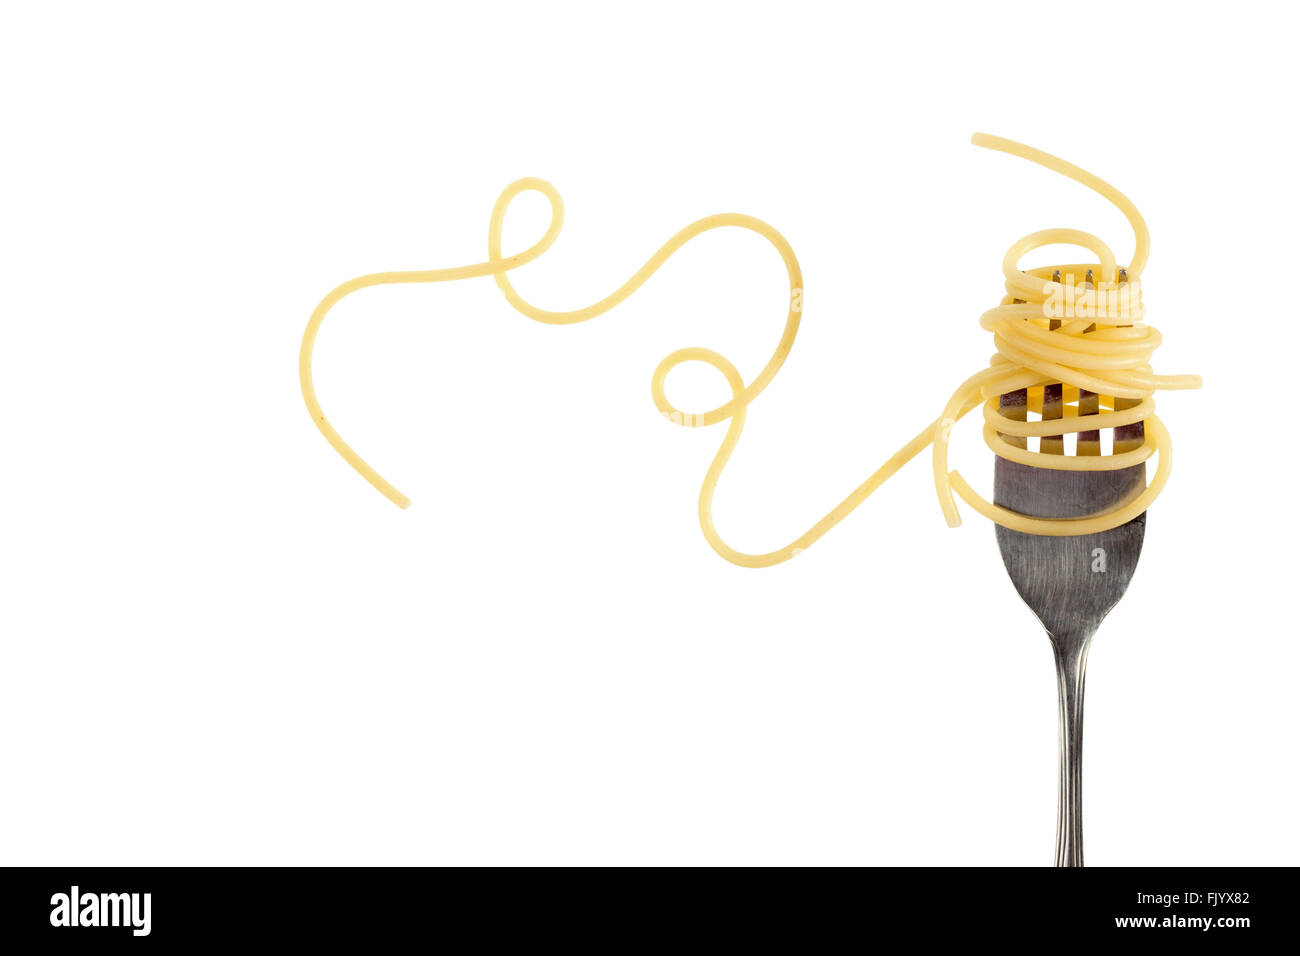 Swirls of cooked spaghetti with fork Stock Photo